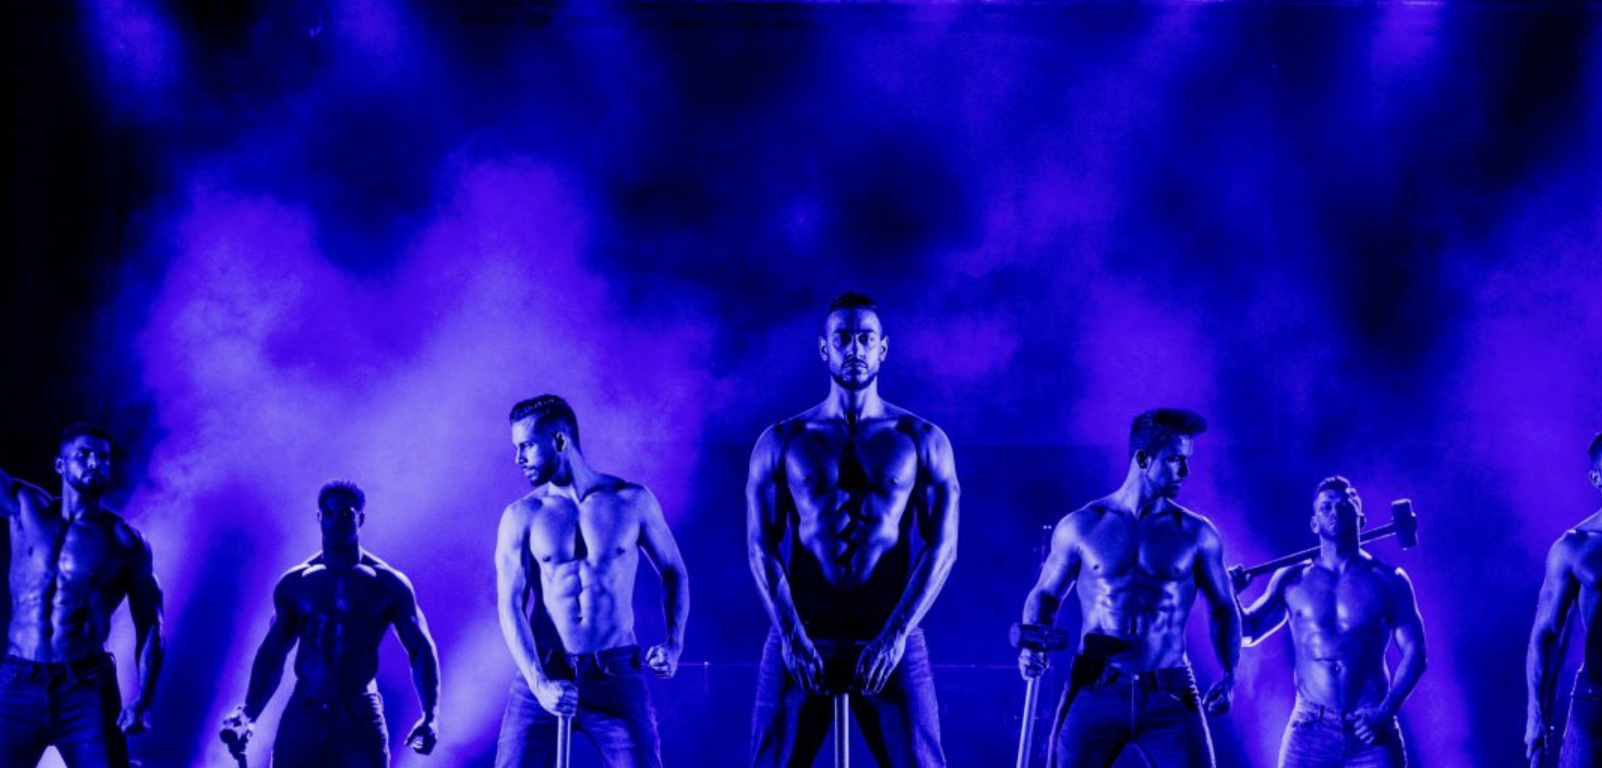 THE CHIPPENDALES am 23. March 2023 @ Wiener Stadthalle - Halle F.